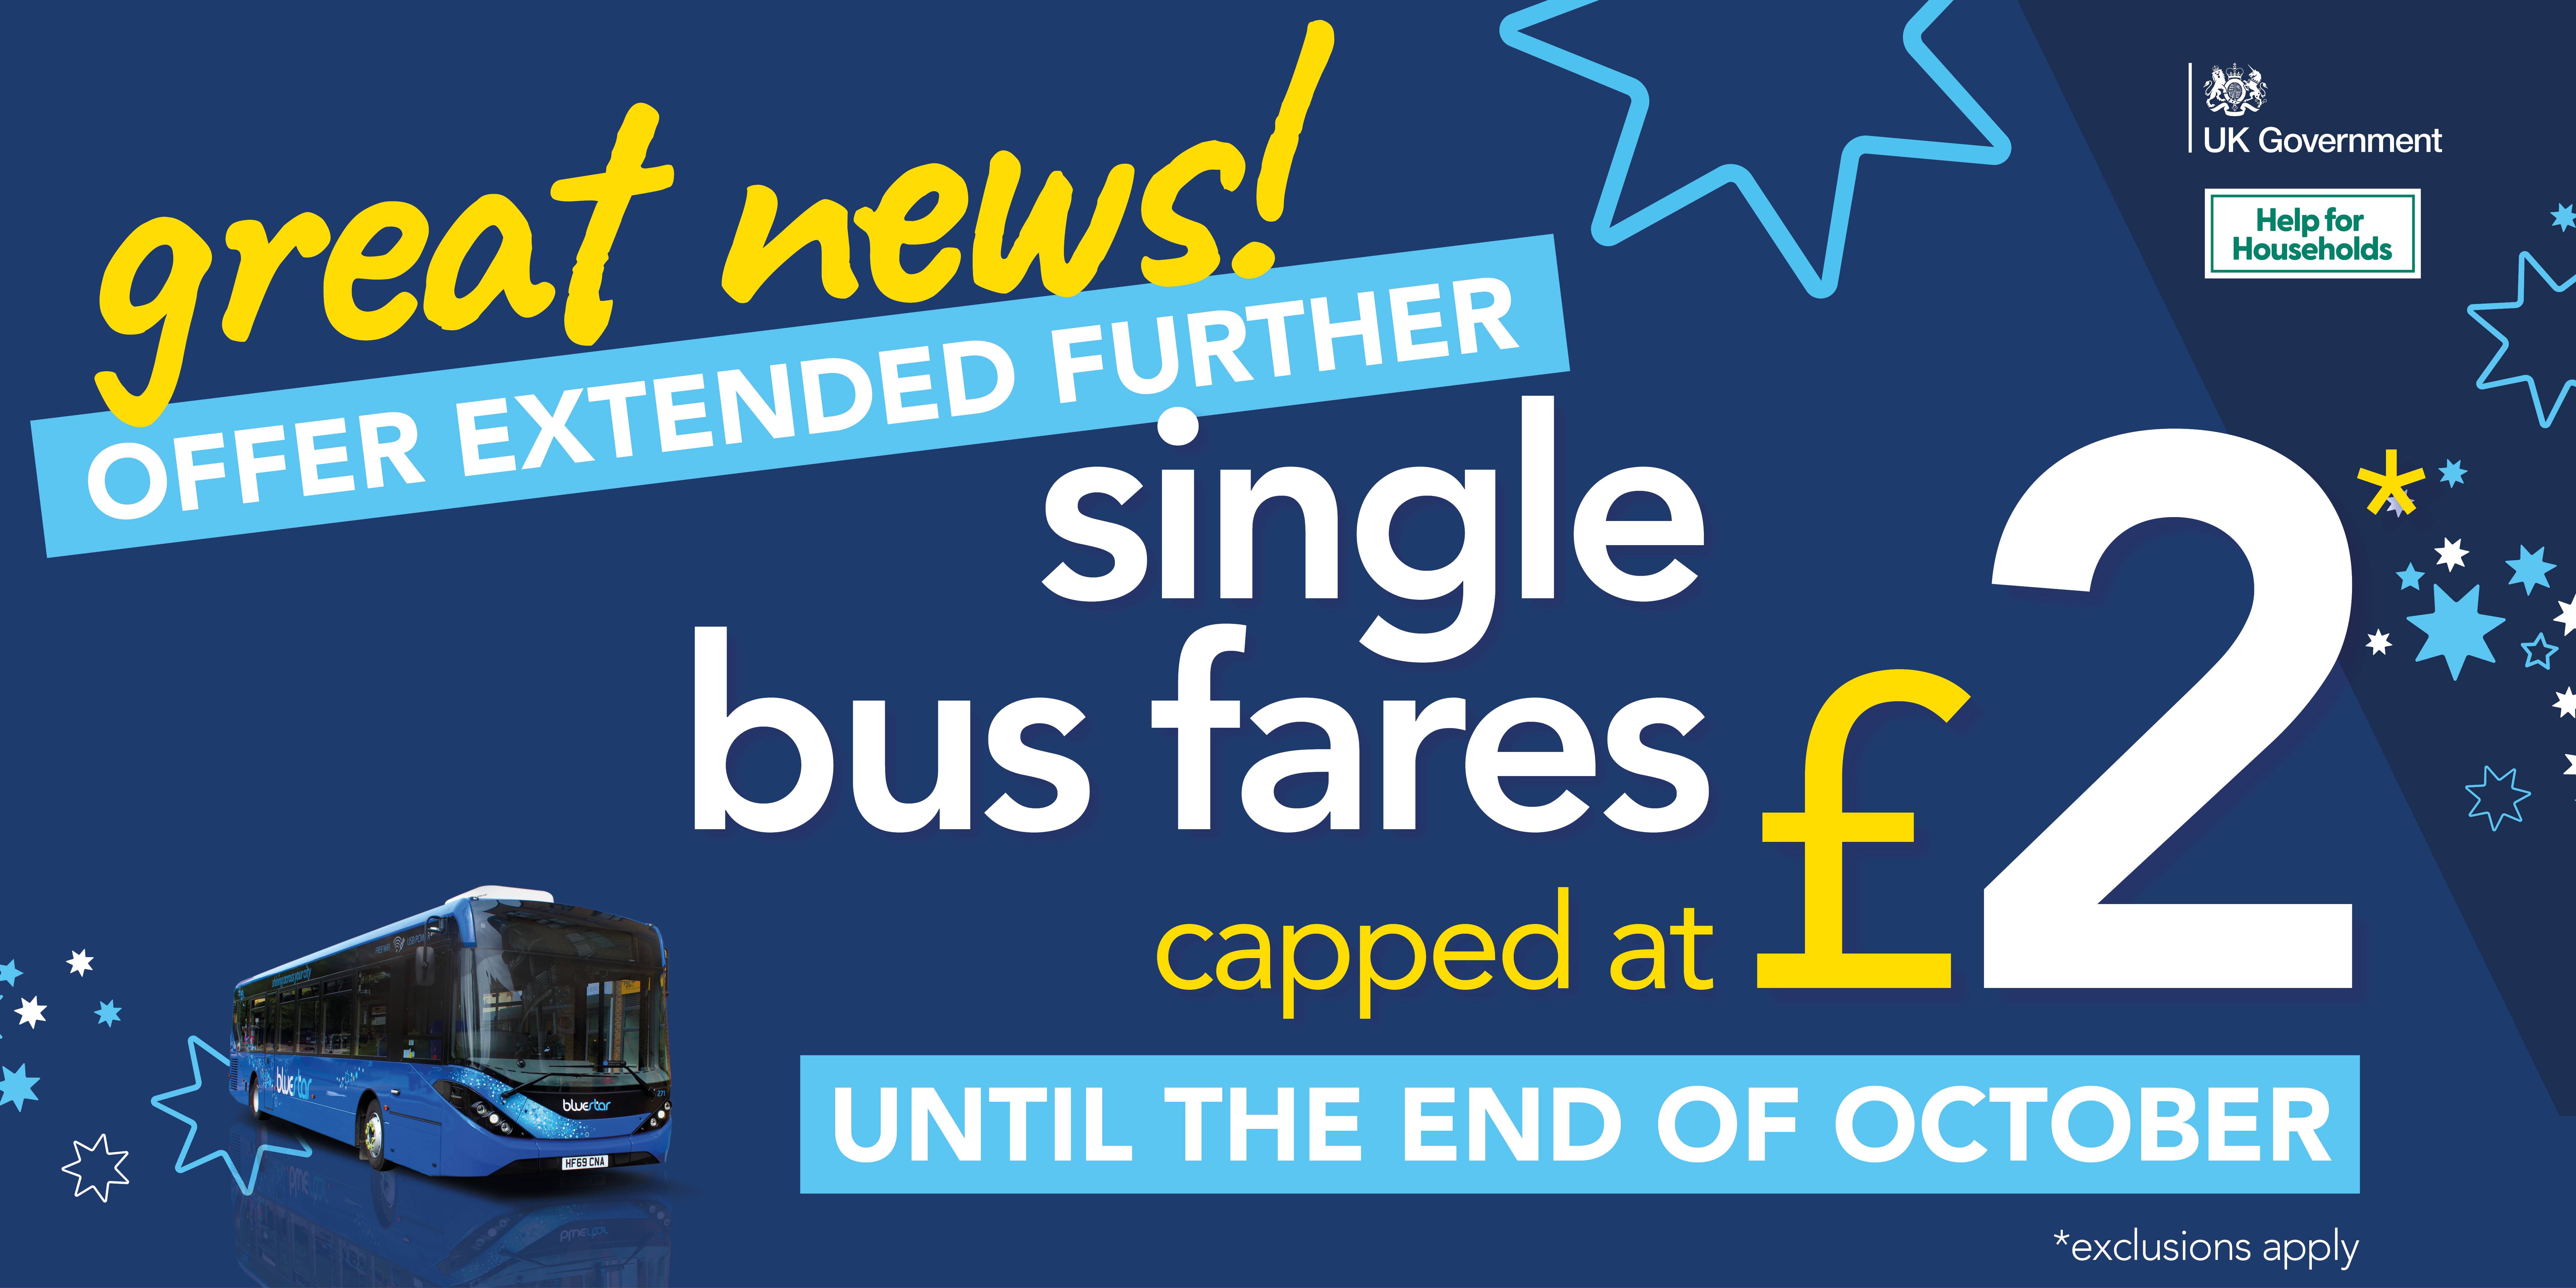 Great news offer extended further, single fares capped at £2 until the end of October image